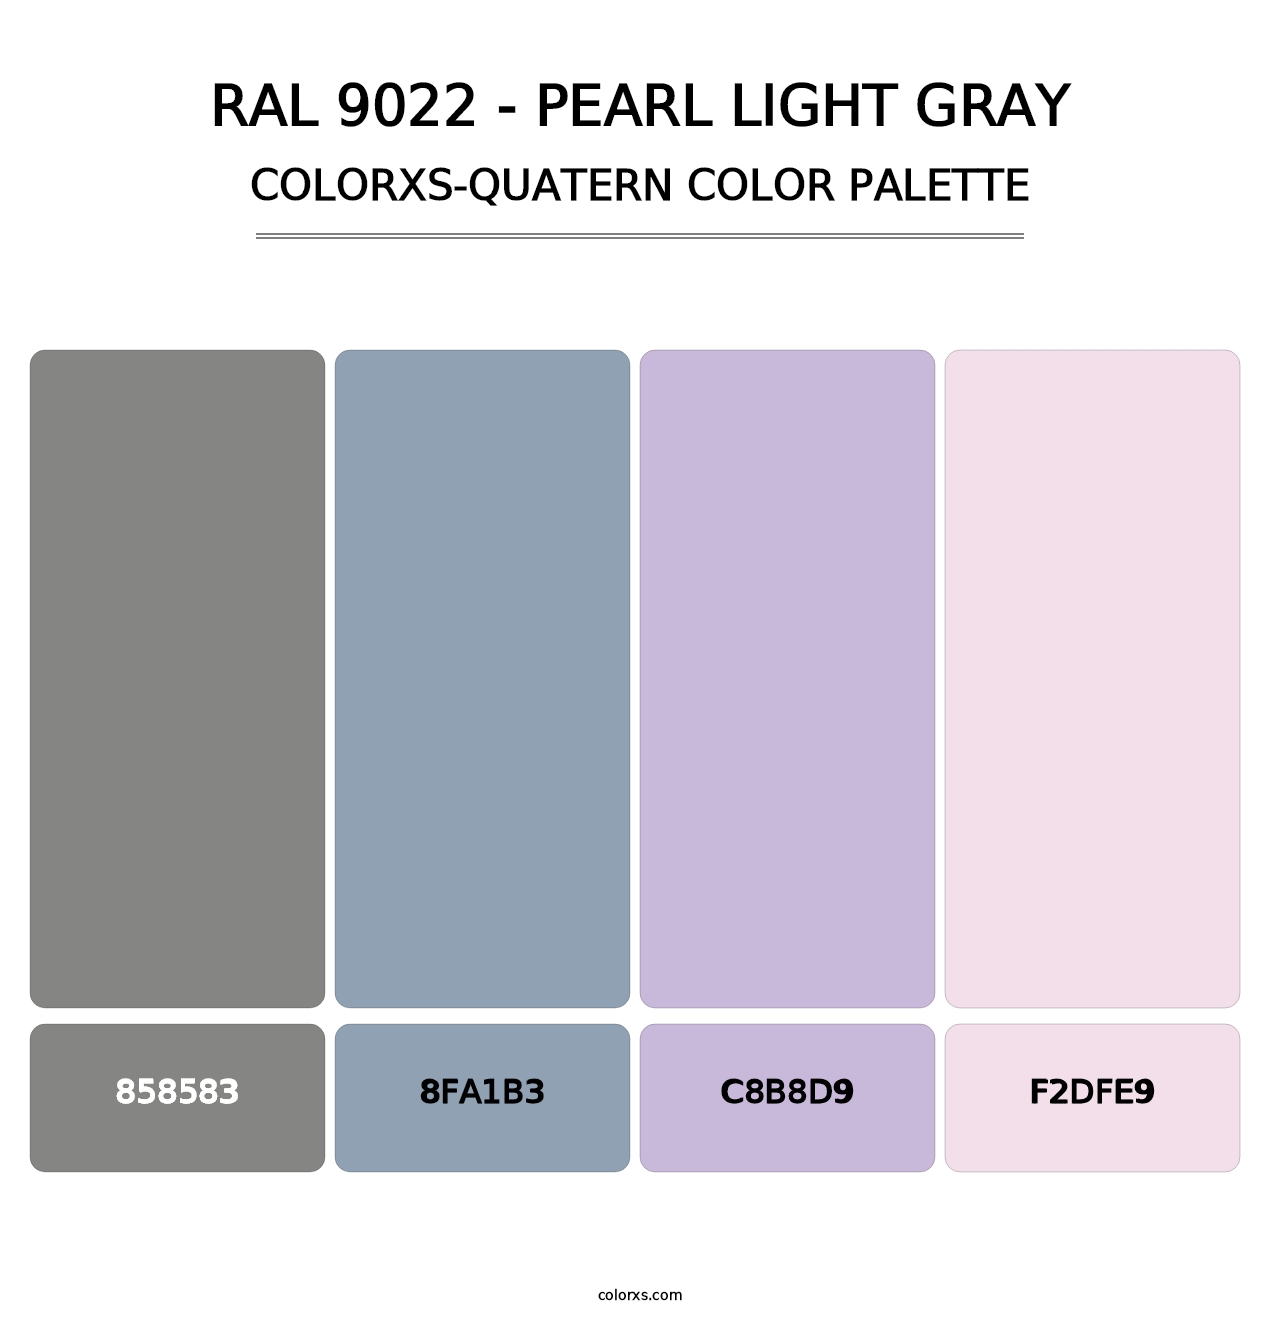 RAL 9022 - Pearl Light Gray - Colorxs Quatern Palette